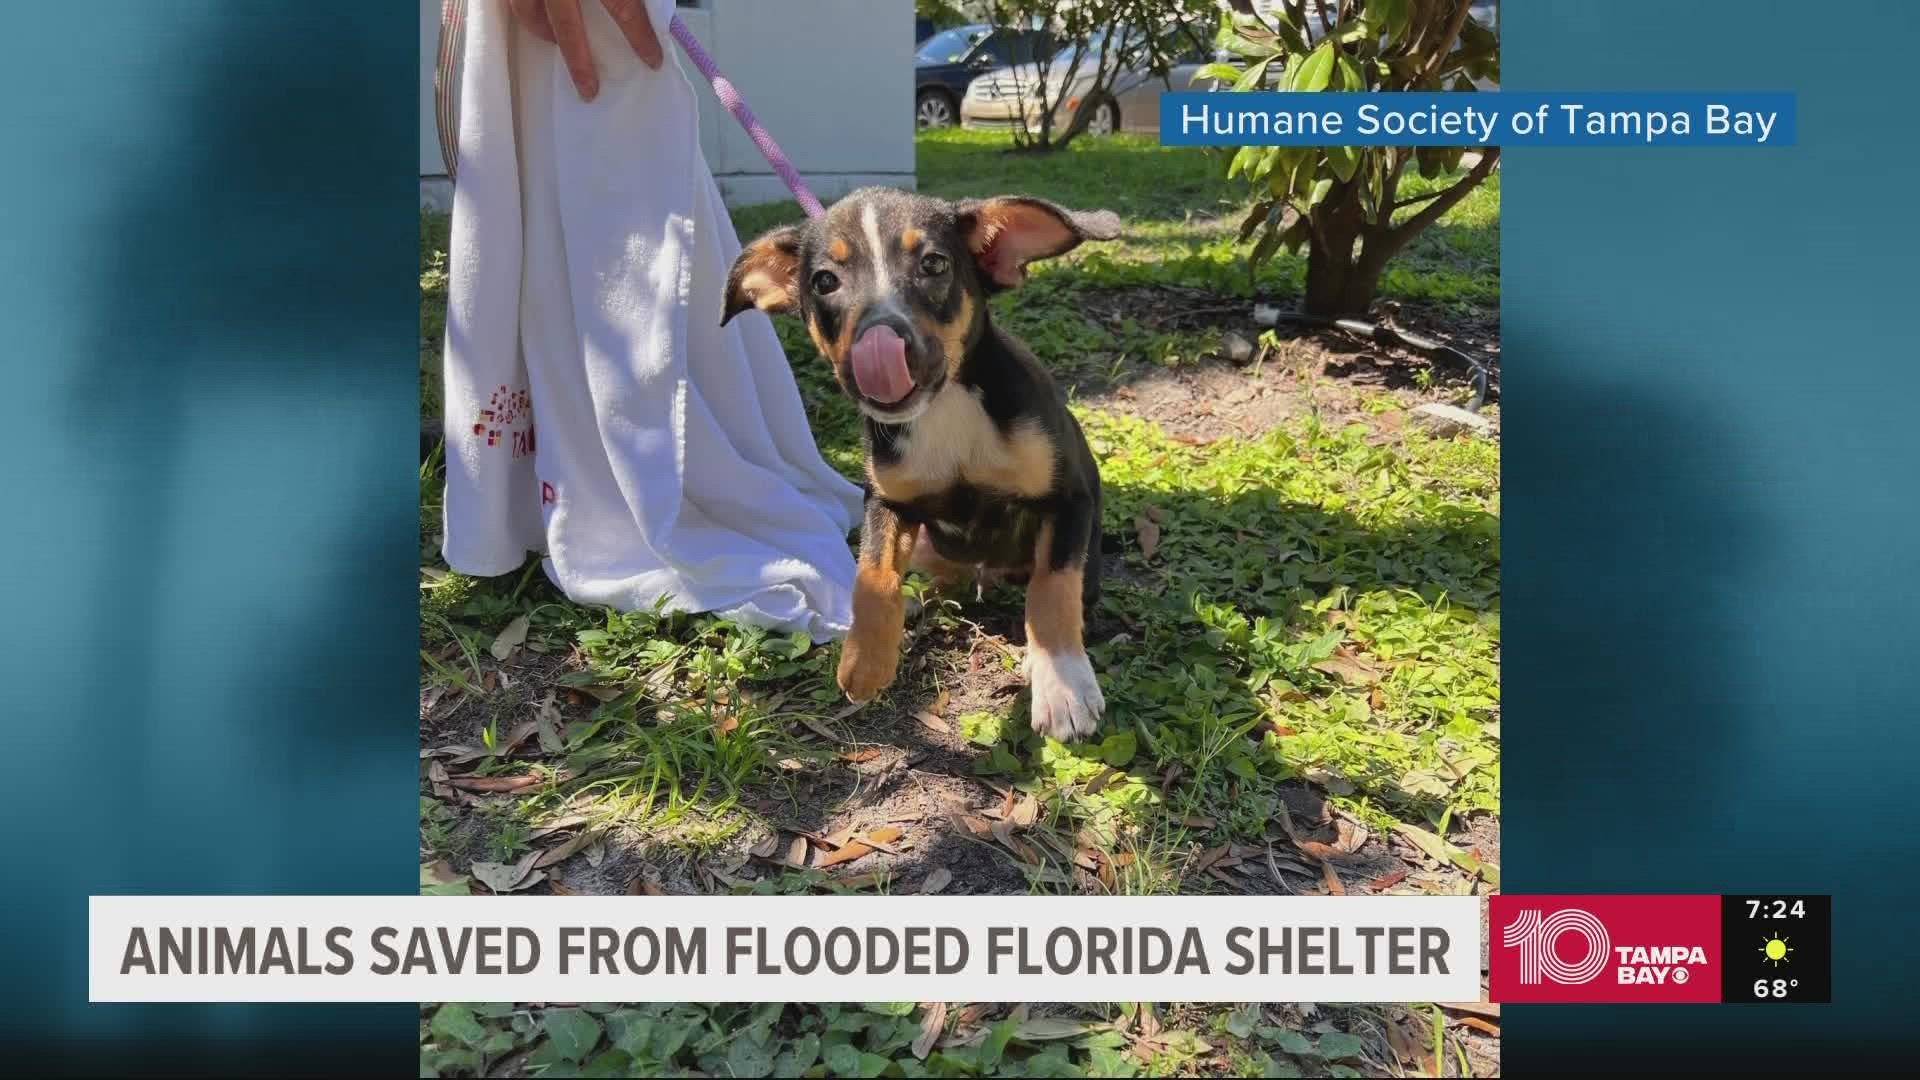 Adorable cats and dogs were saved from their flooded shelter and now are in need of a home.